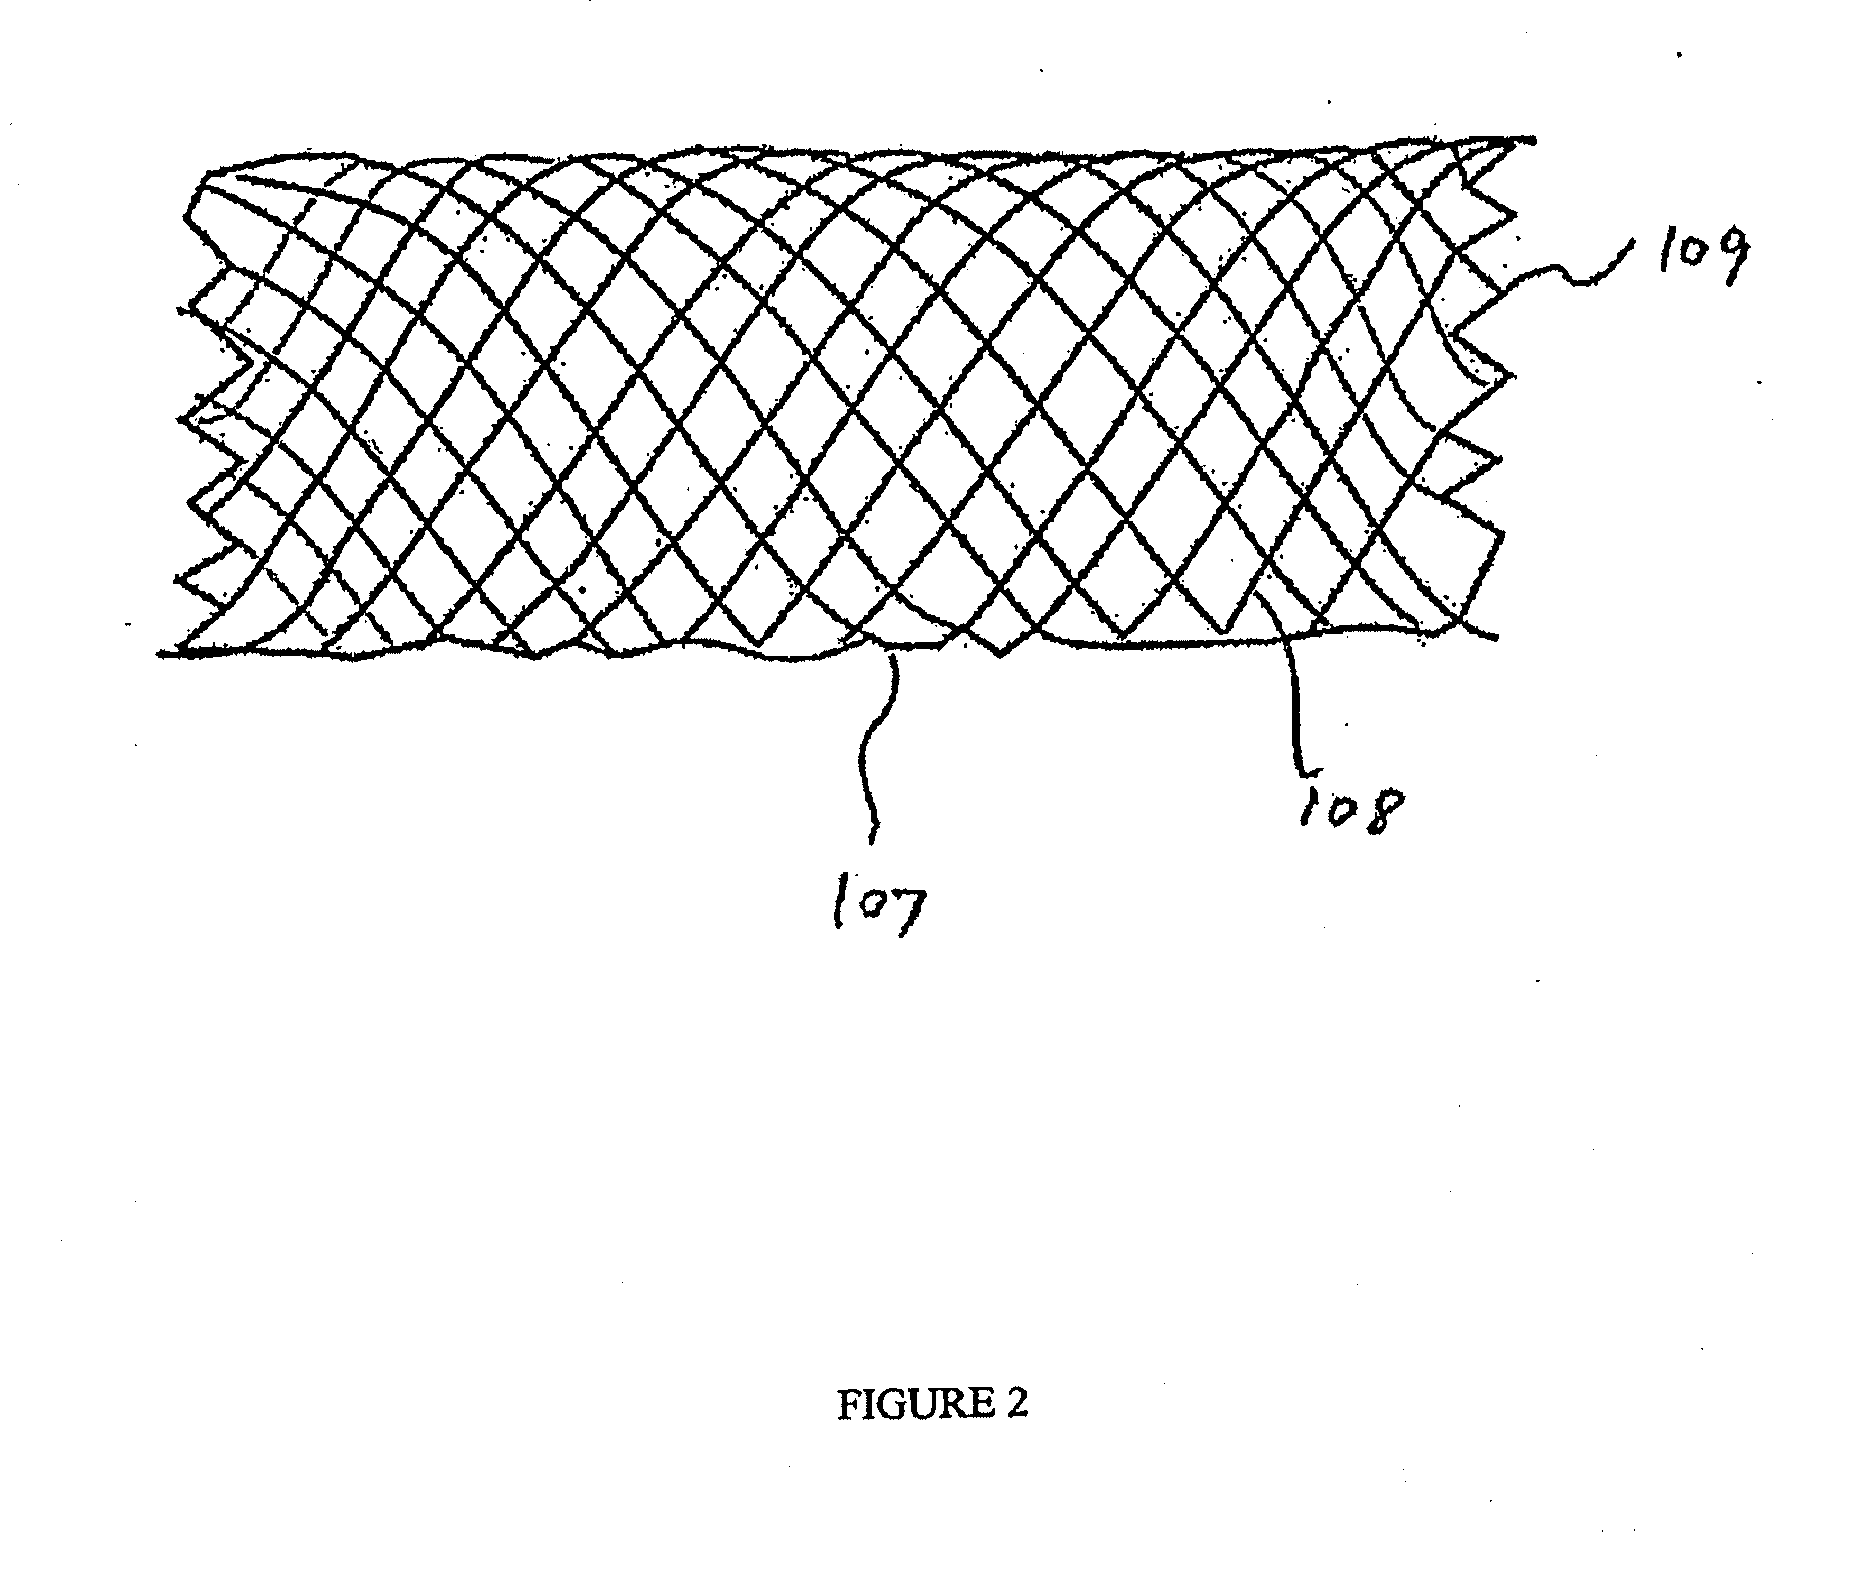 Endovascular device